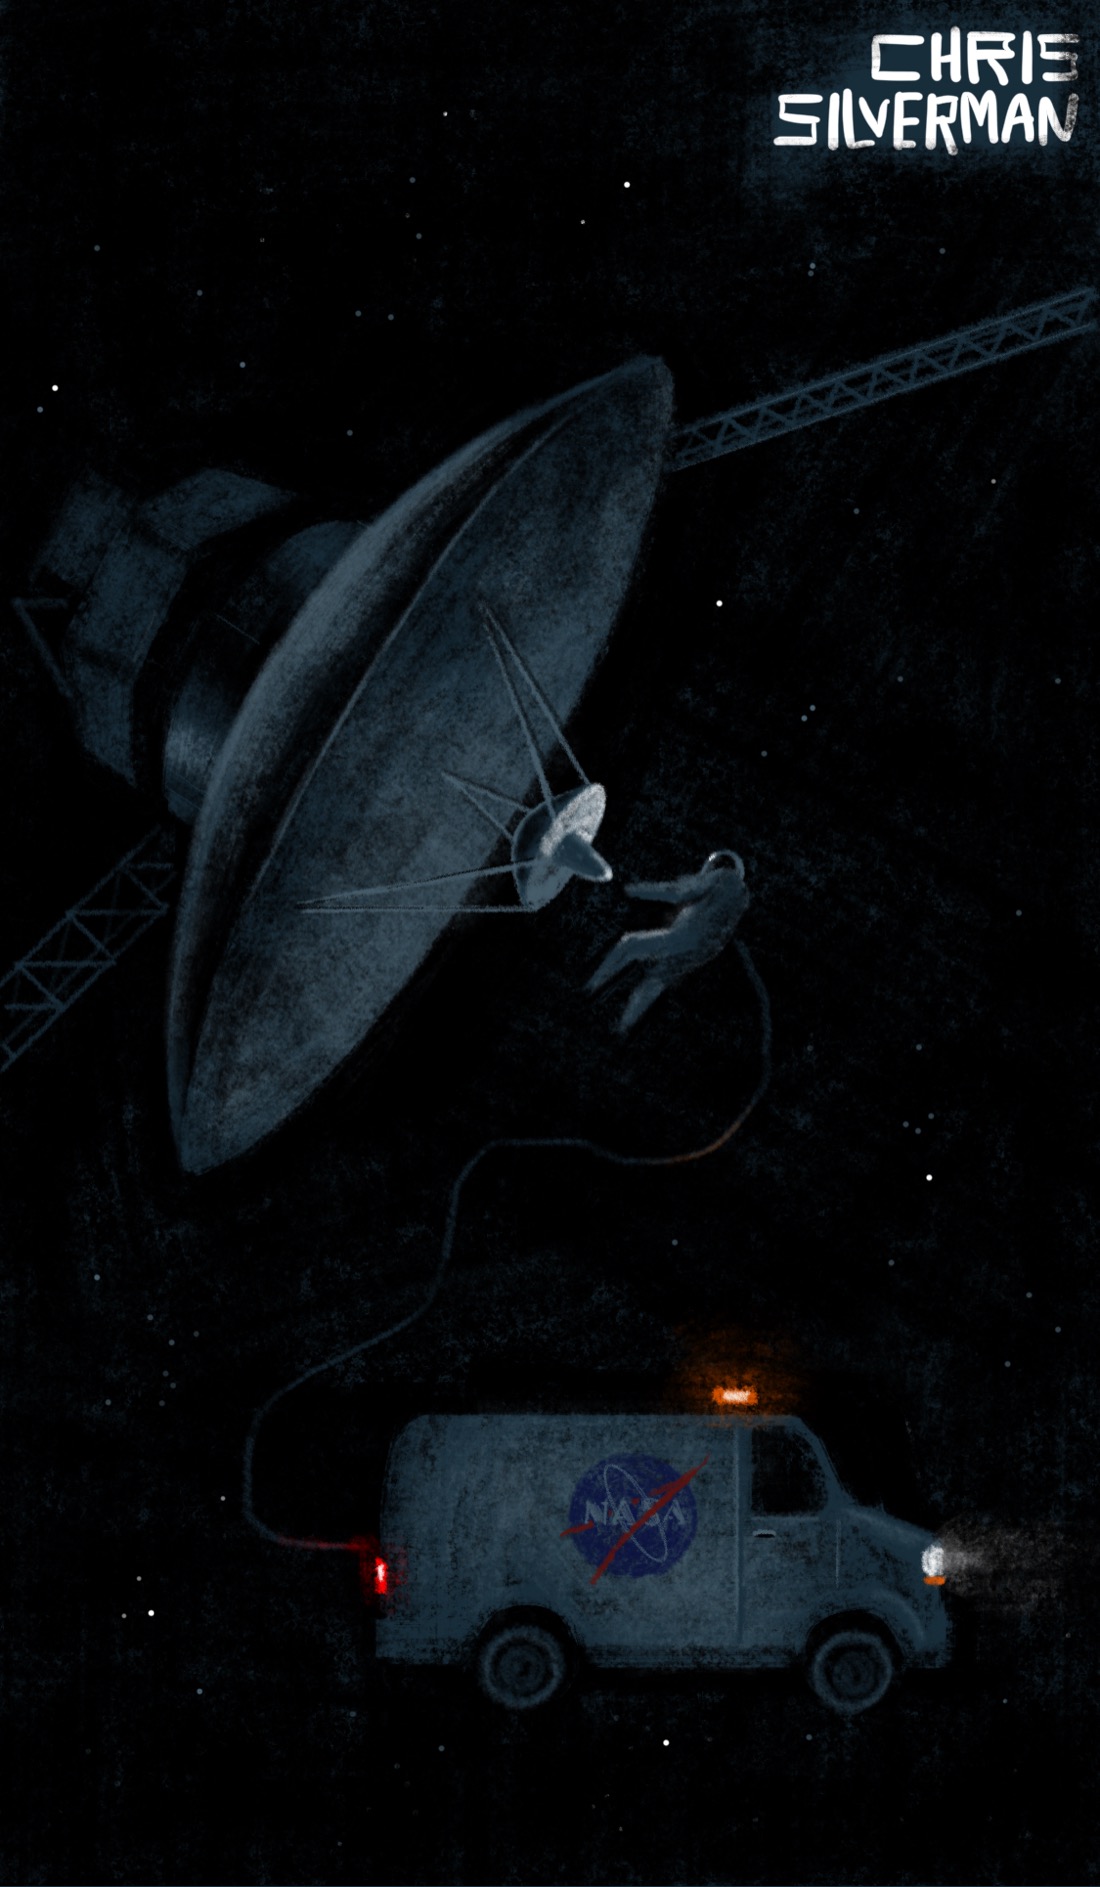 The Voyager I spacecraft in deep space. The craft has a giant radio dish. Dimly visible behind it are some radio masts and panels. Floating below it is a small gray maintenance van with an orange flashing light on top and the NASA logo on the side. Floating in front of the dish, evidently making some repairs, is an astronaut tethered to the van. Behind is a black sky filled with stars.